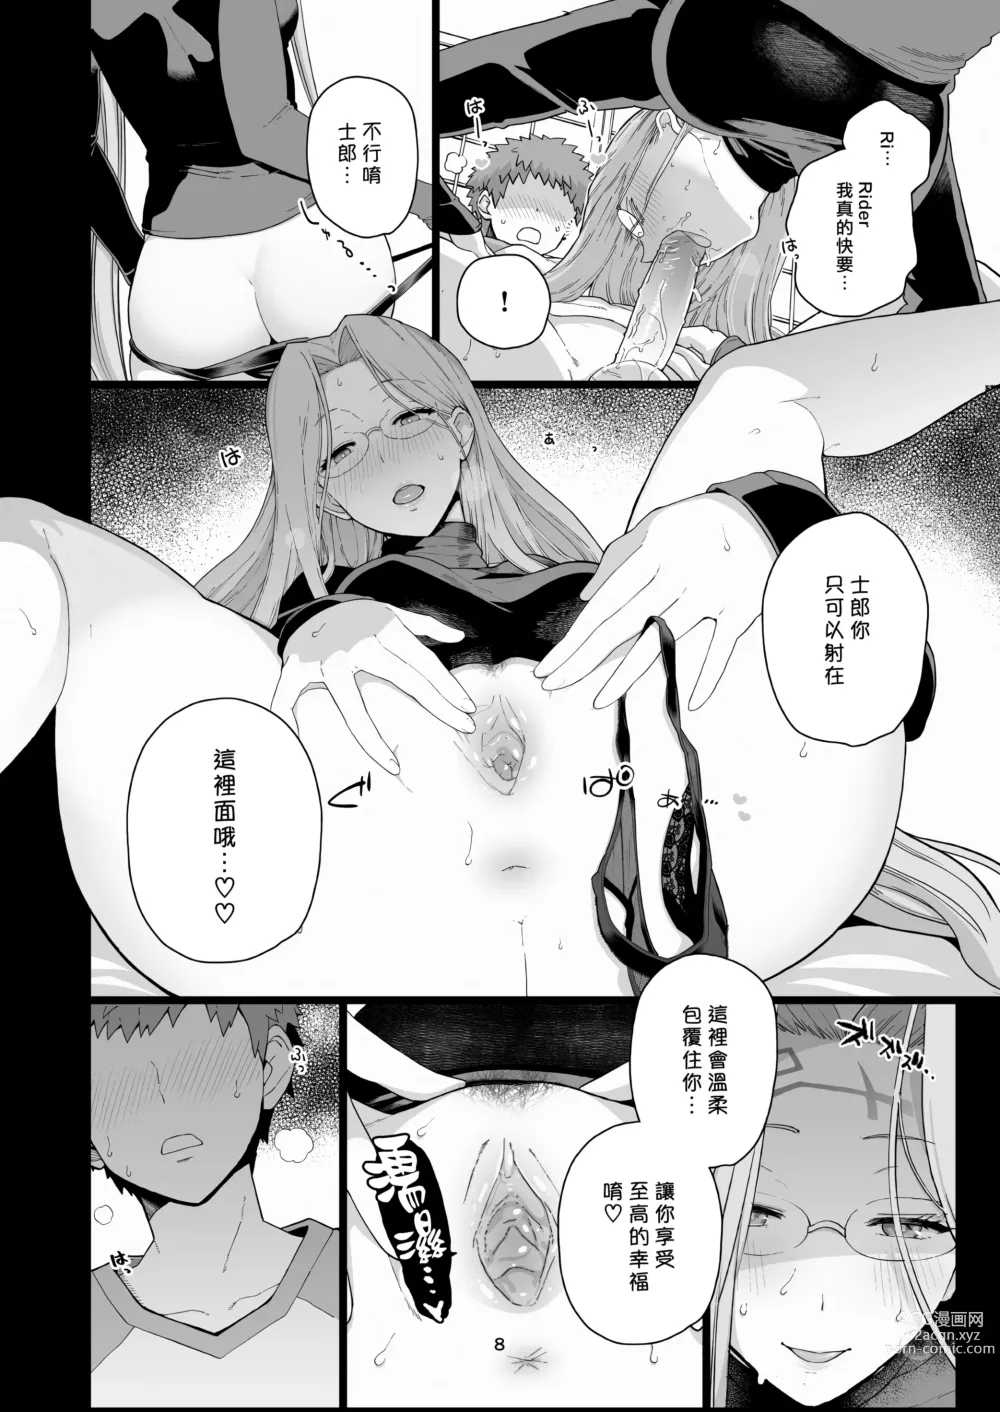 Page 11 of doujinshi Rider小姐的偷吃 (decensored)